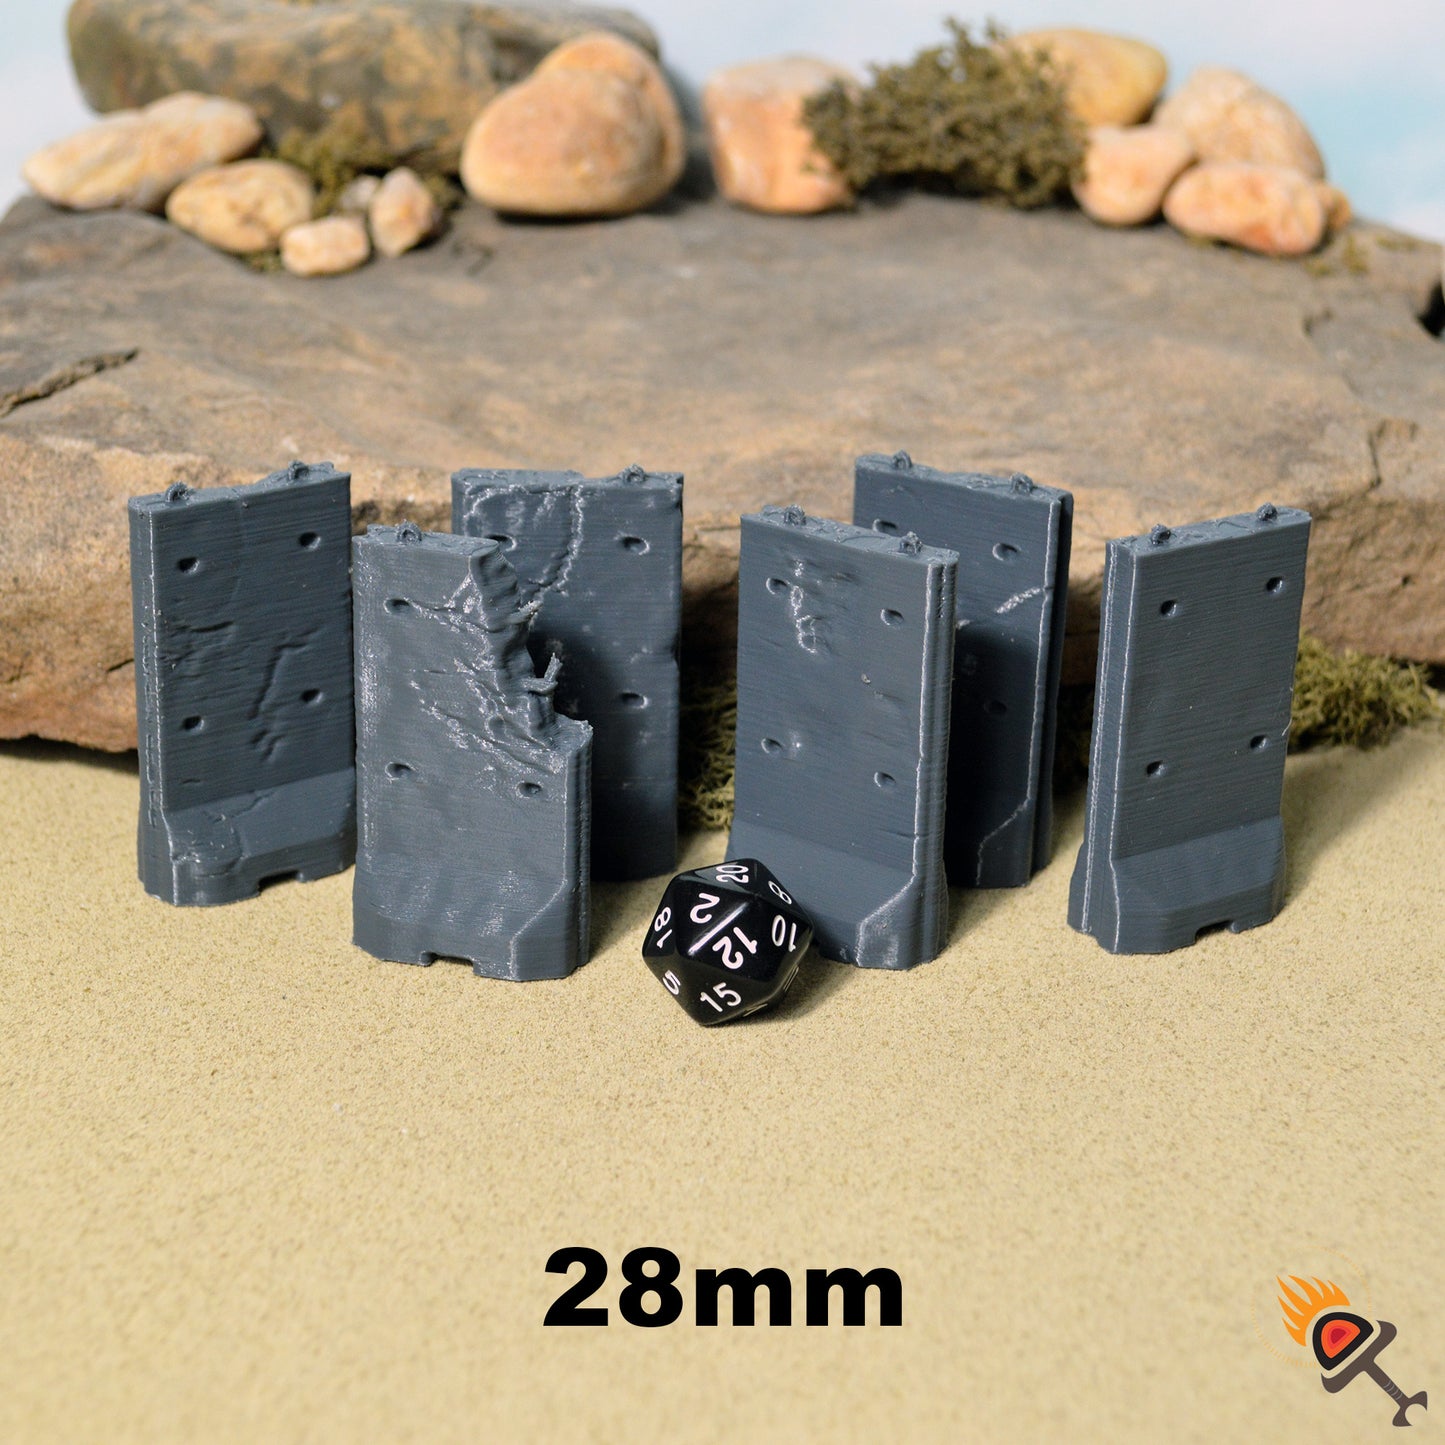 Miniature Alaska Barriers for Gaslands 15mm 20mm 28mm 32mm, Concrete Wall for Post-Apocalyptic Fallout Wasteland, Necromunda Ash Wastes